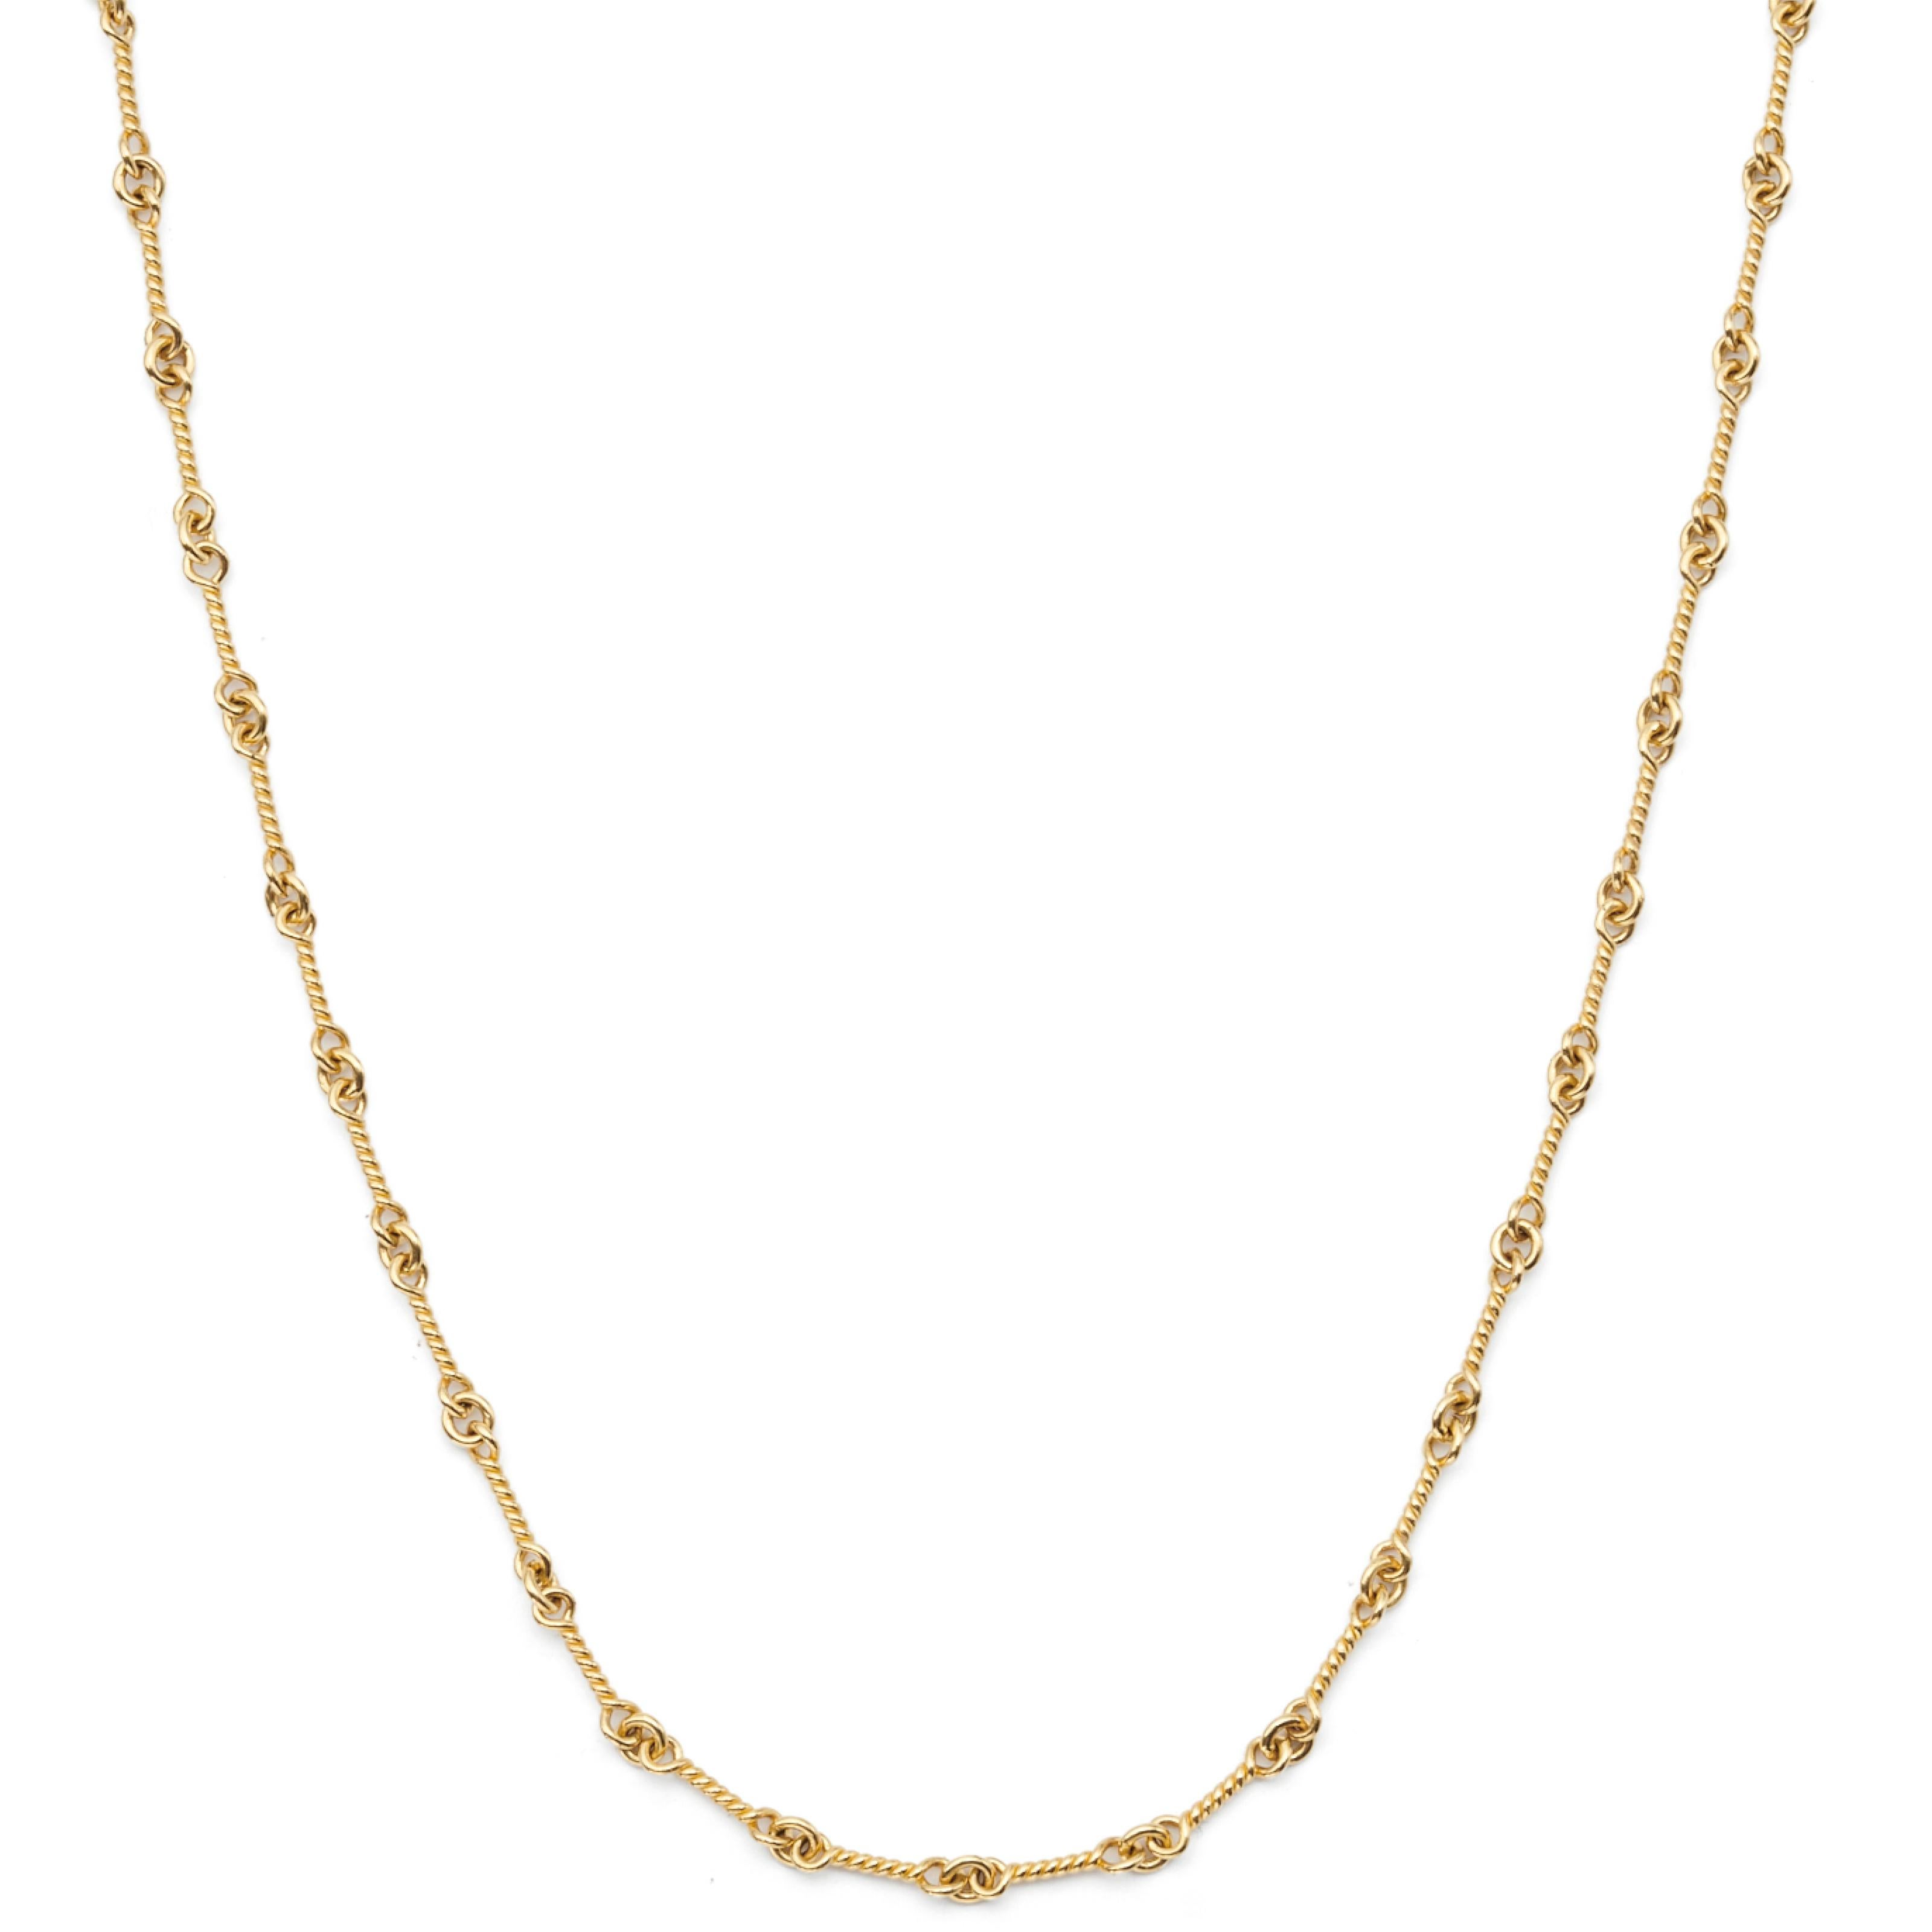 24-inch Twist Chain in 18kt Gold.

Available in five lengths.
7-inch, 16-inch, 18-inch, 20-inch and 24-inch